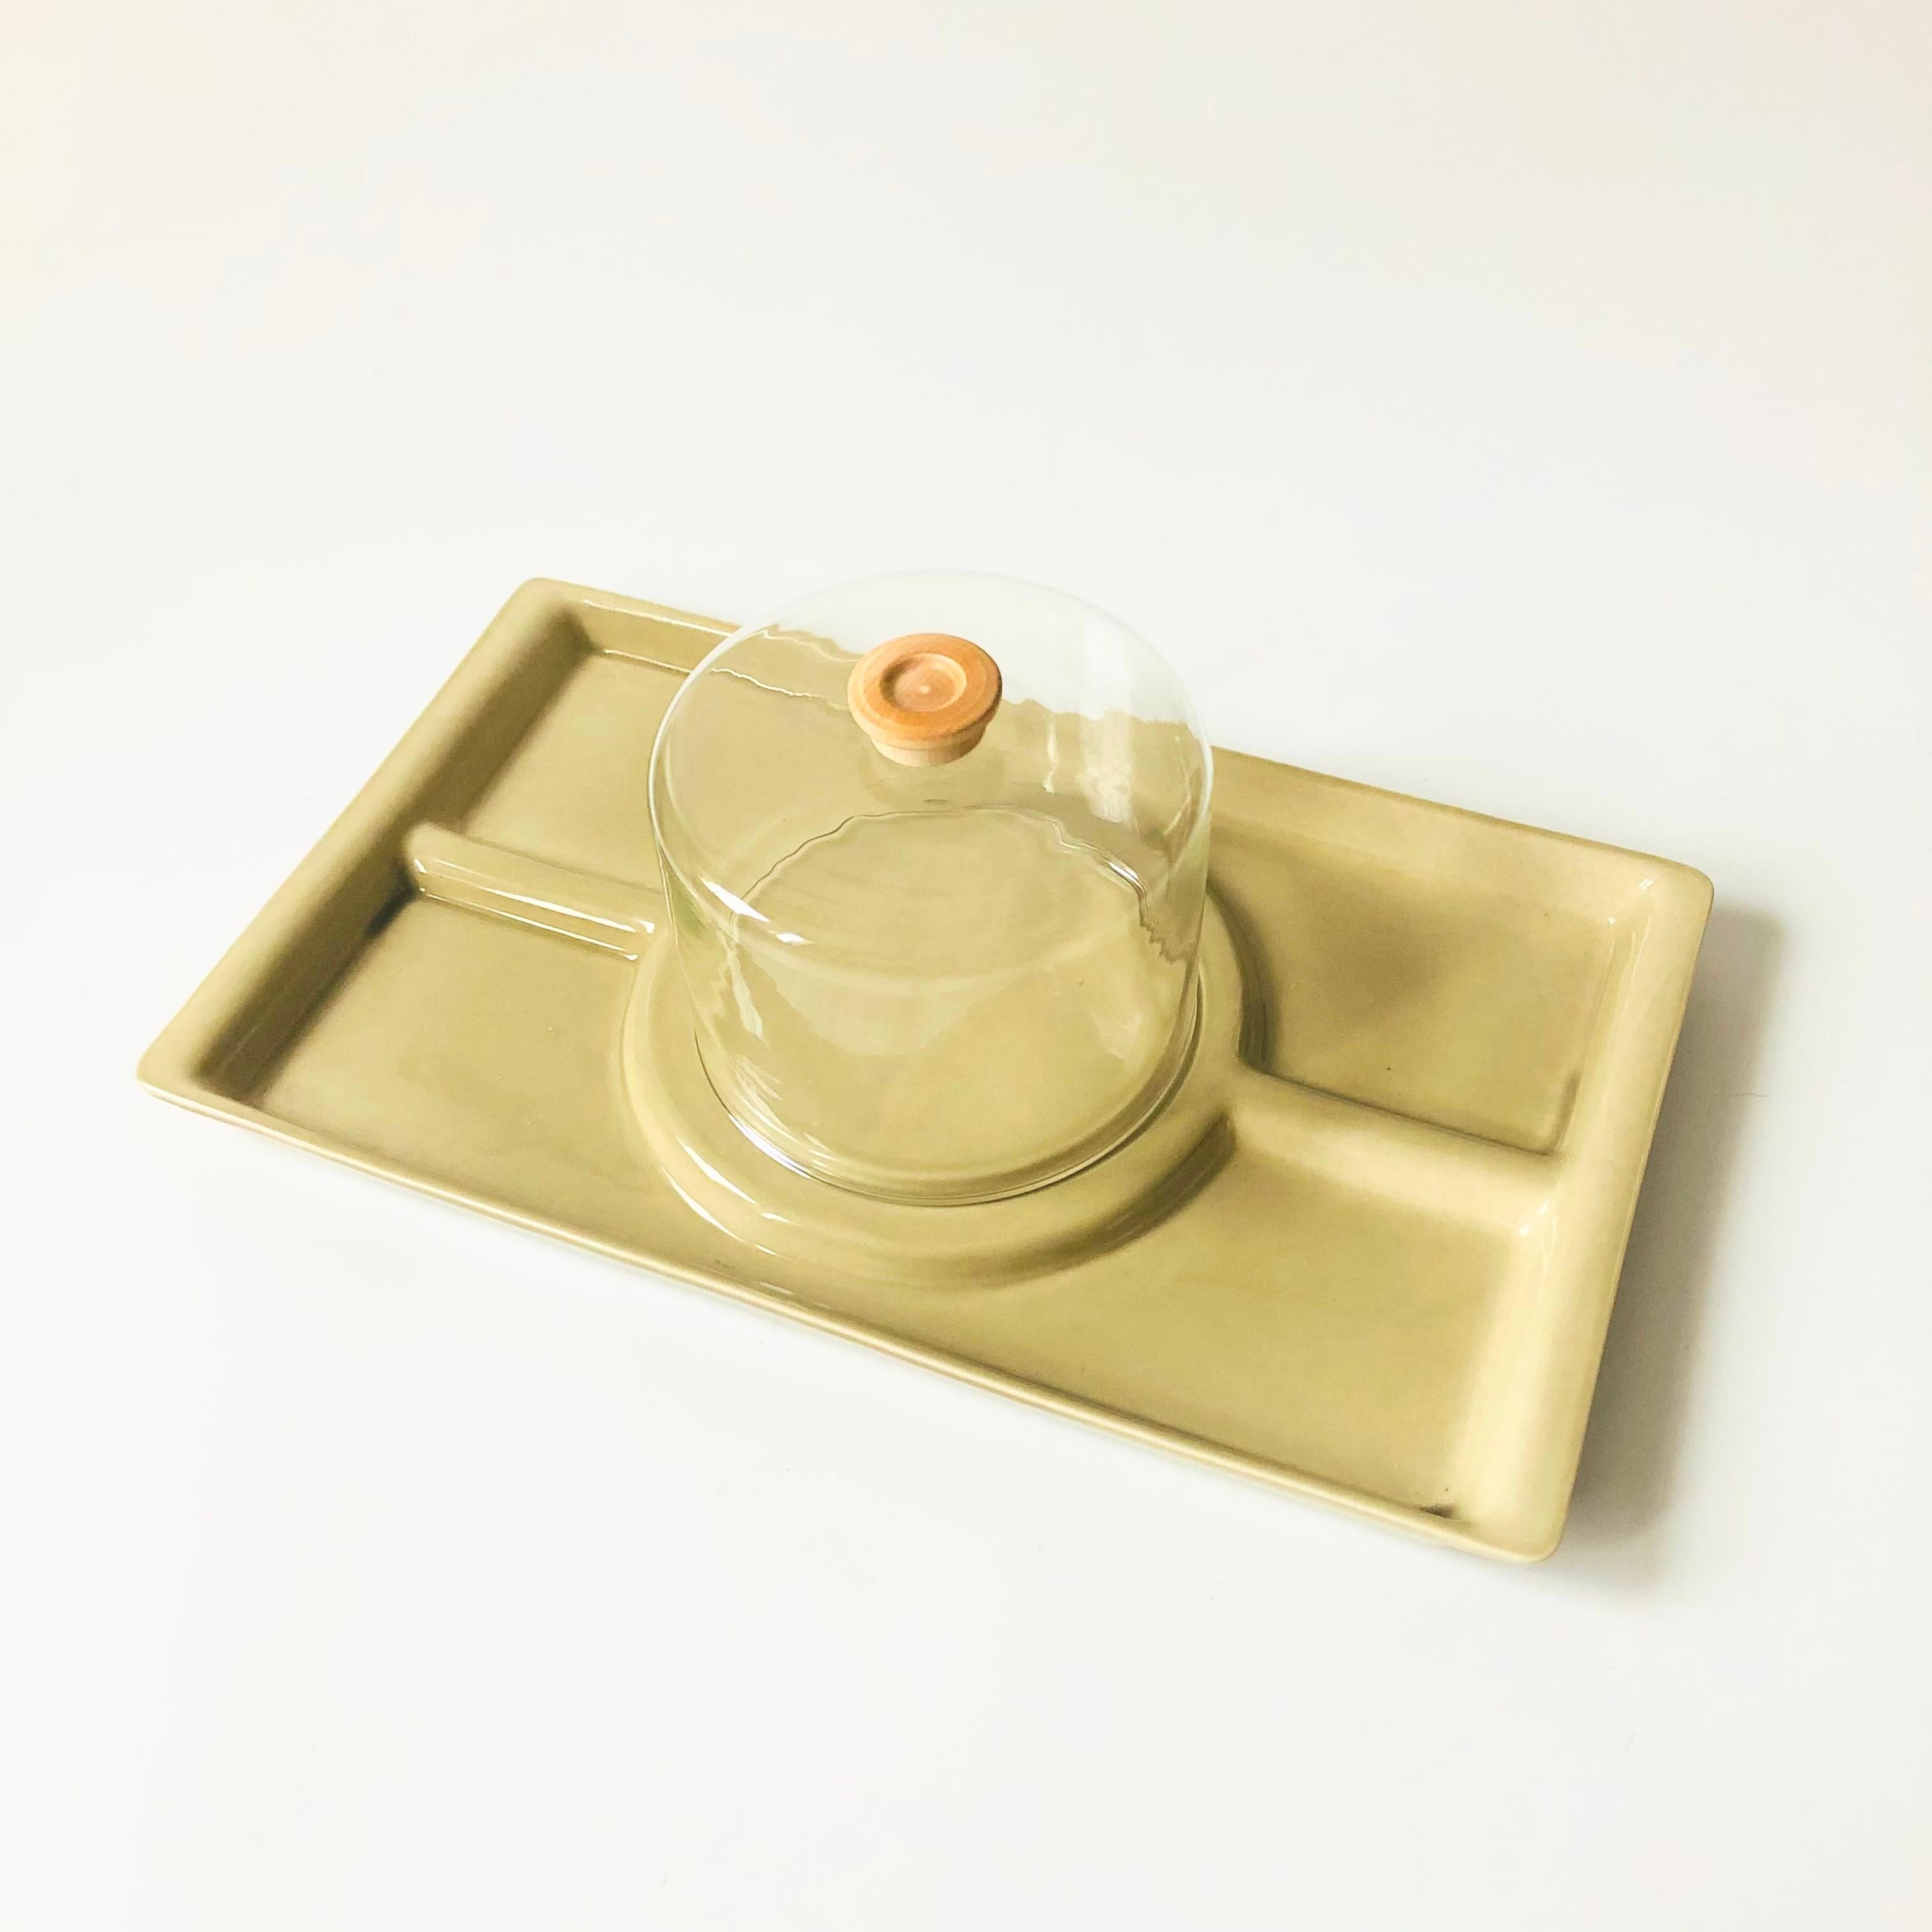 A large mid century cheese and cracker serving tray with a glass cloche. The tray has 4 divided compartments for serving and is made of ceramic with a muted greenish beige colored glaze. A wood knob tops the glass cloche. Made in the USA by